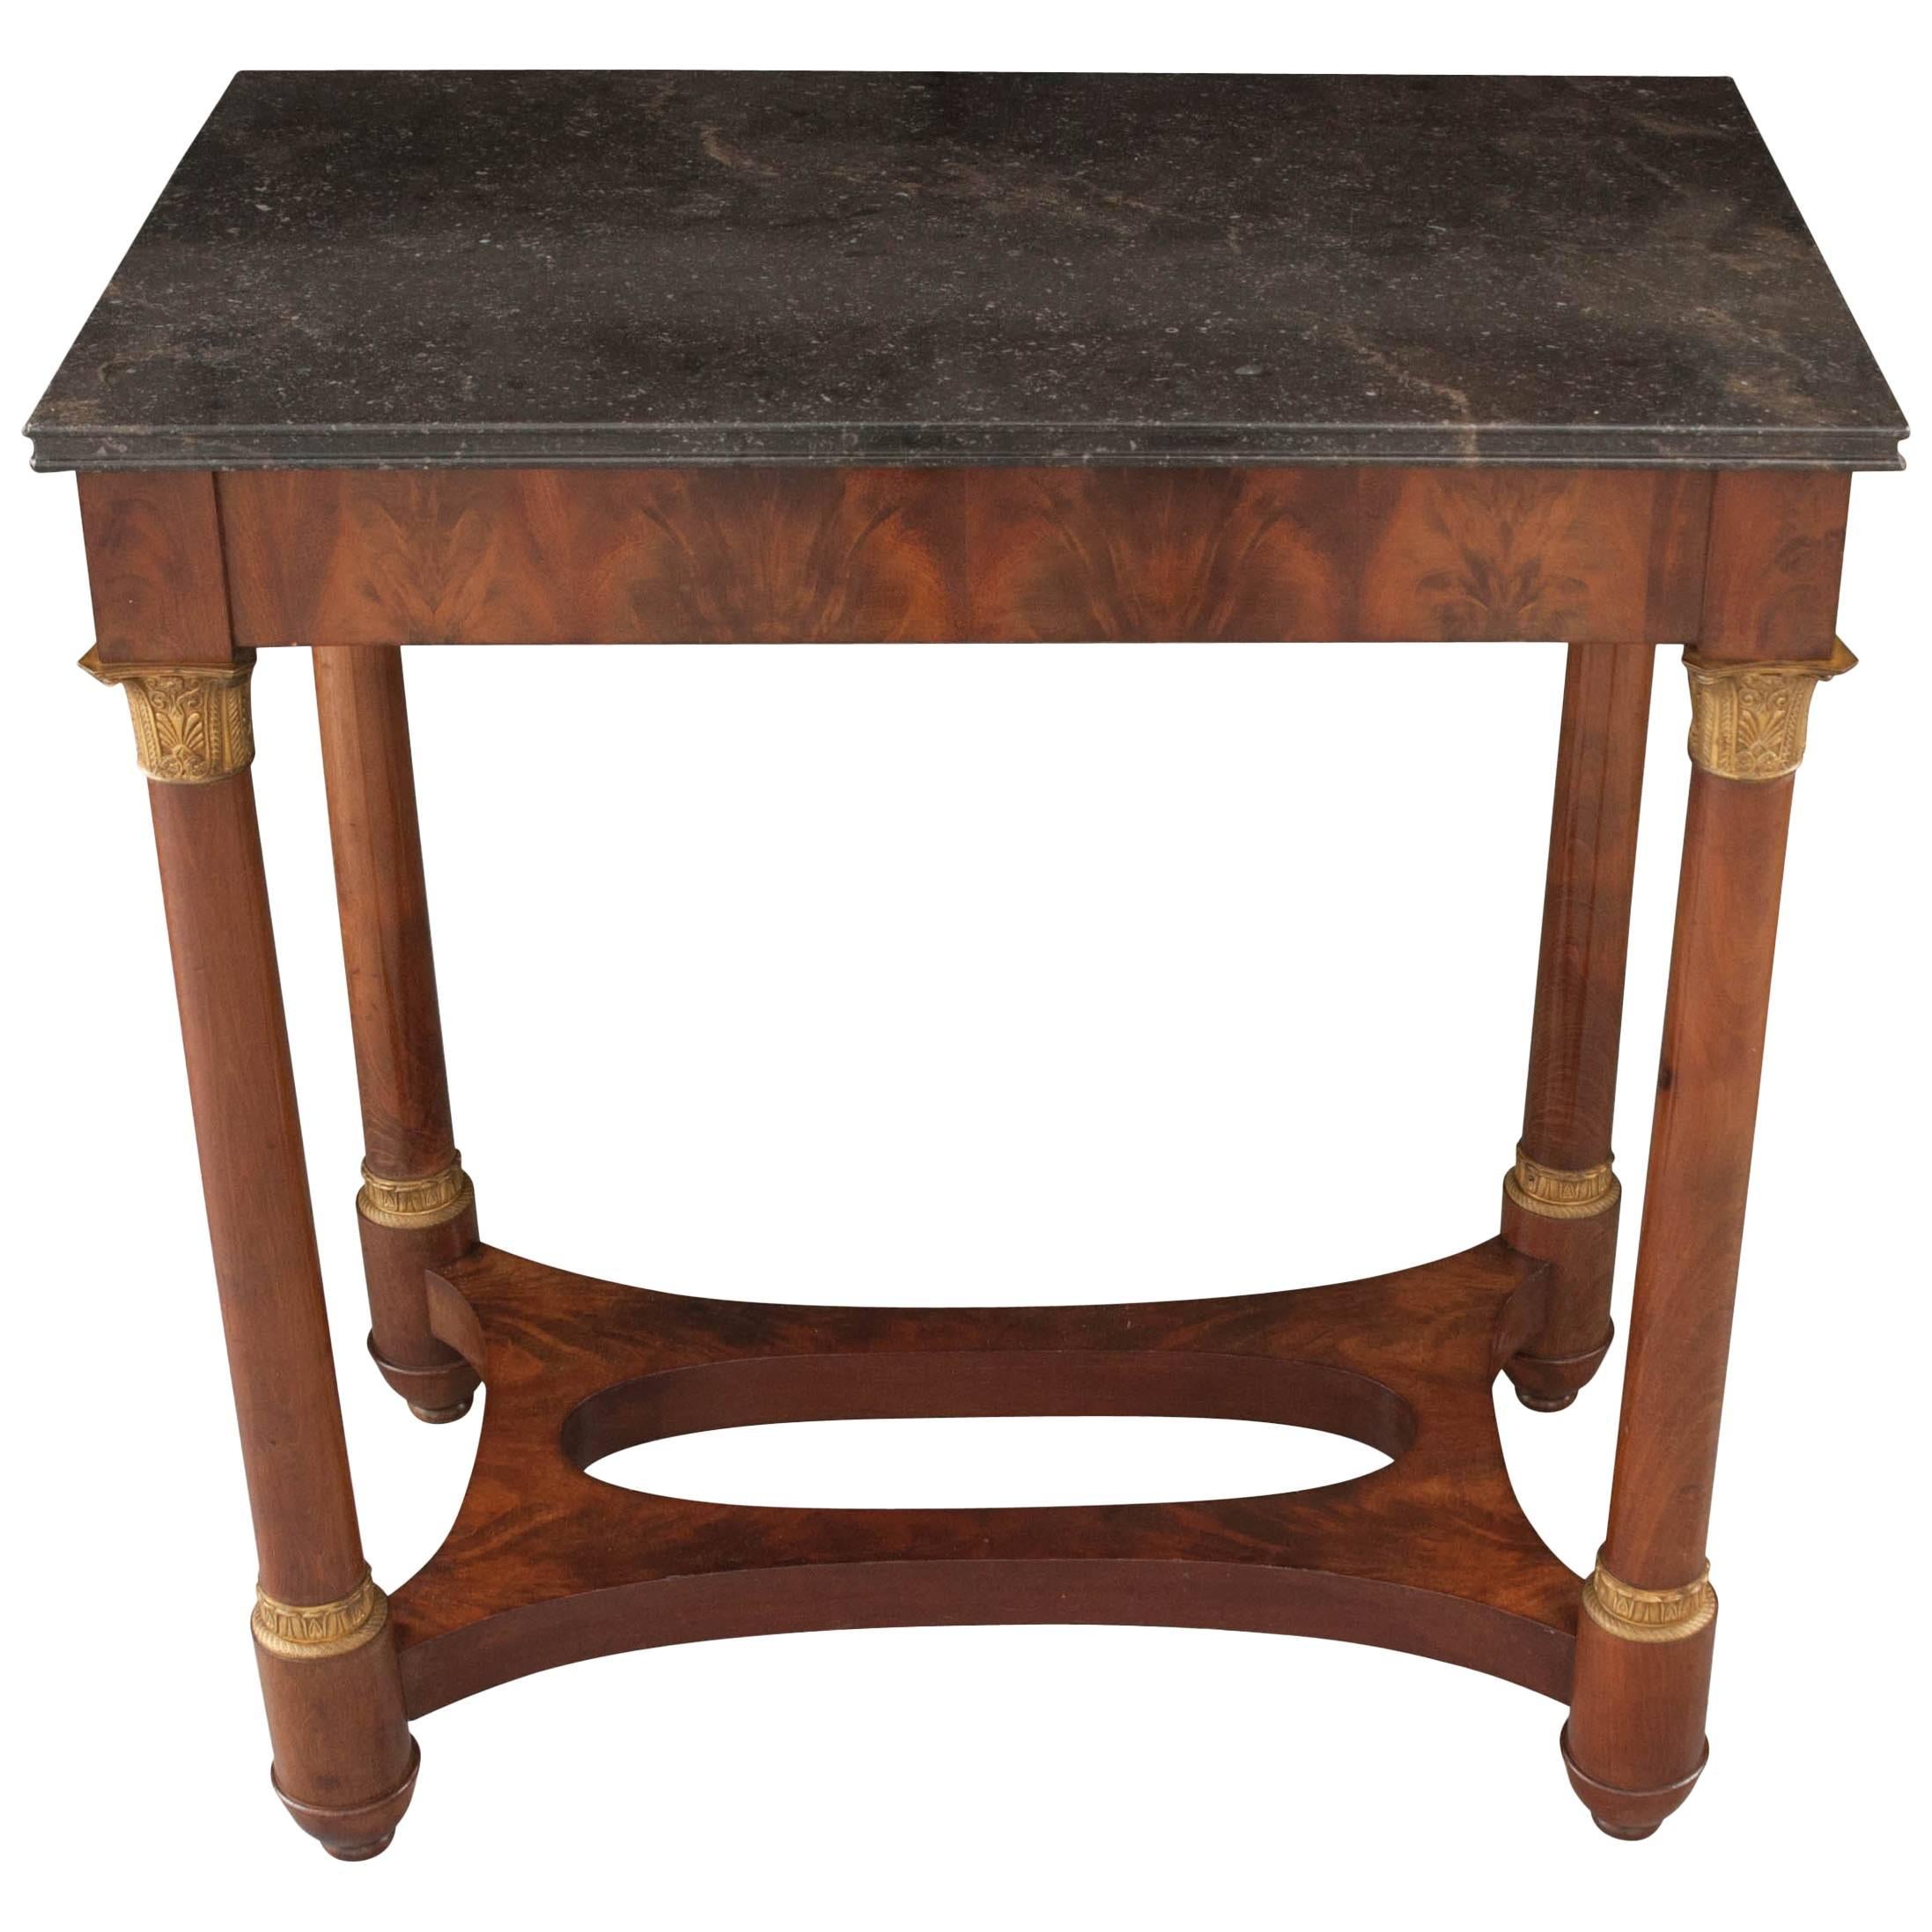 French Empire Style Mahogany Table with Marble Top